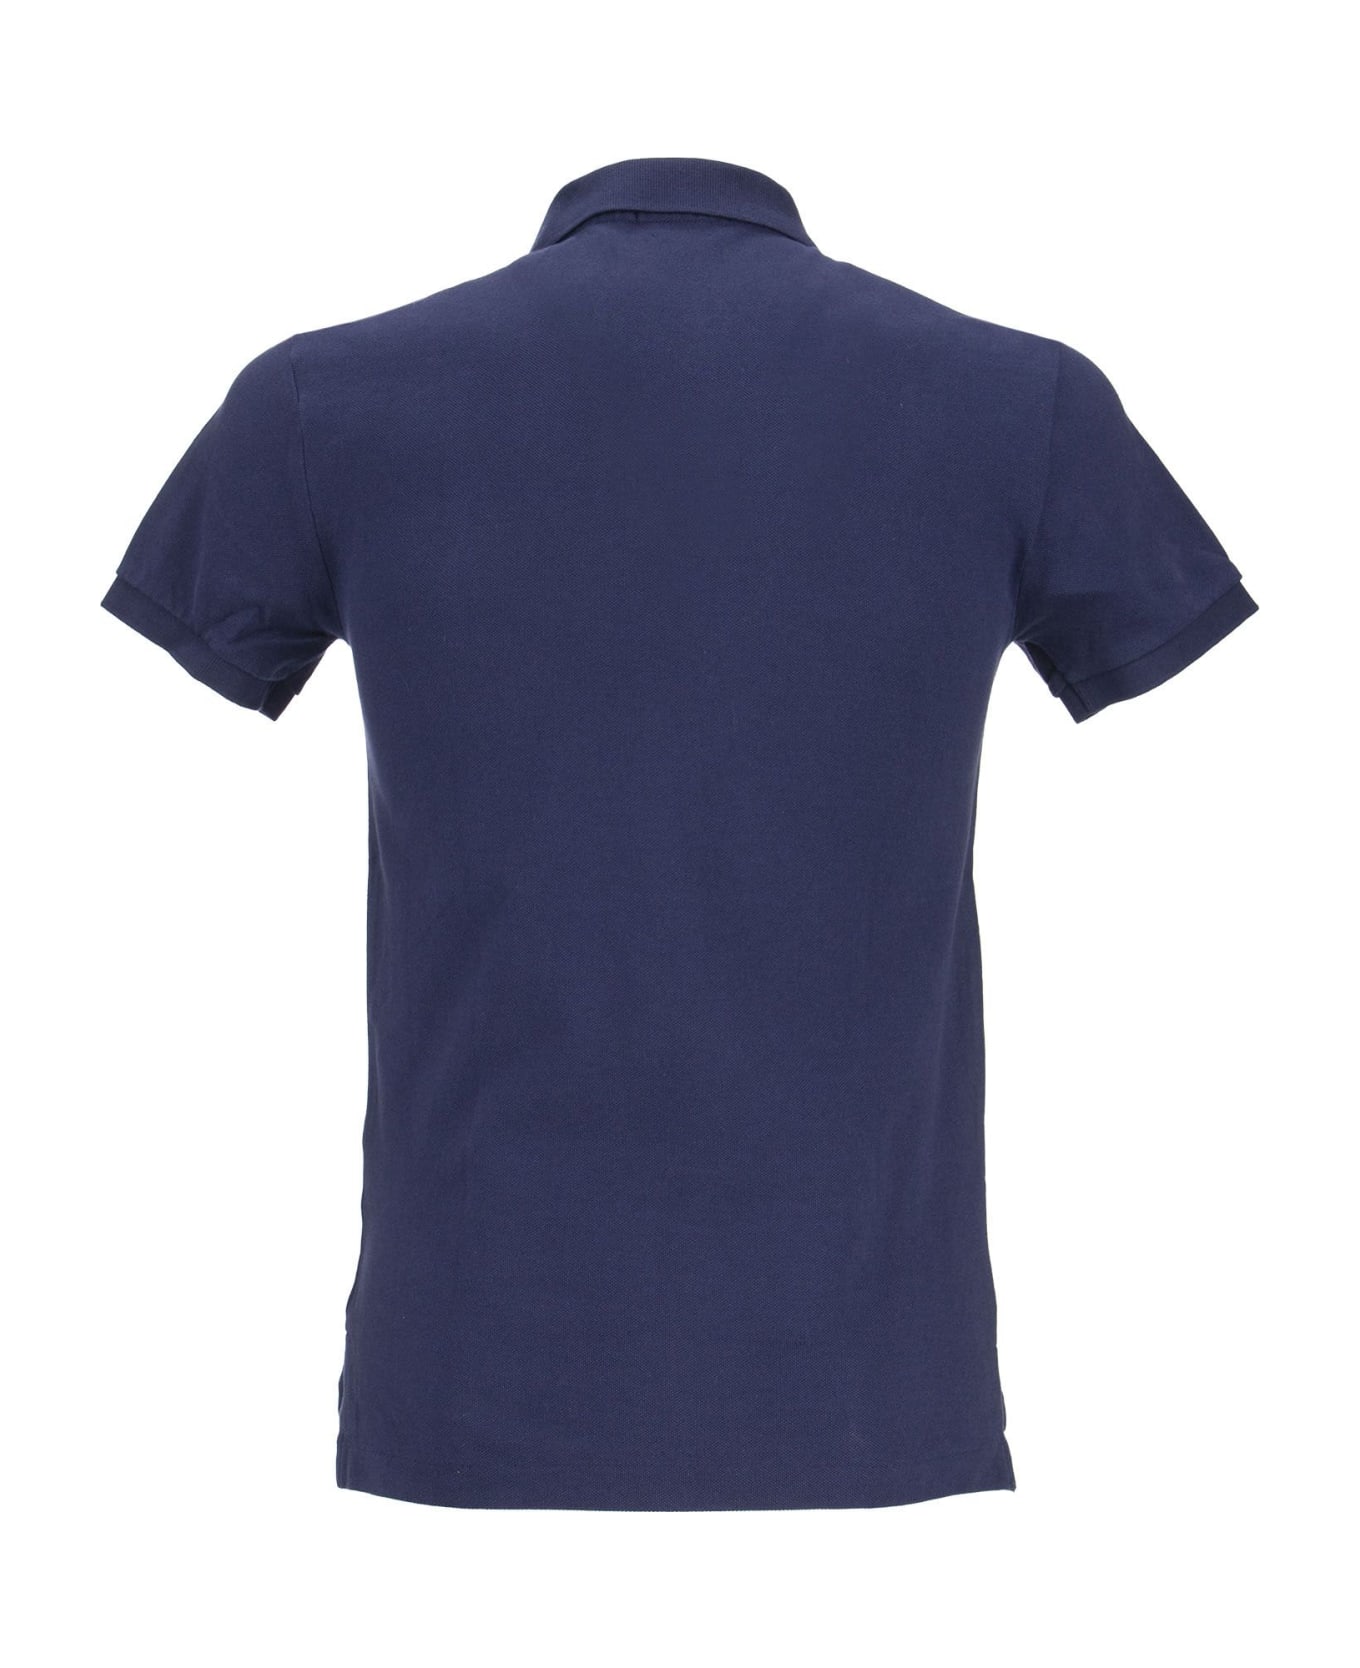 Ralph Lauren Navy Blue And Red Slim-fit Pique Polo Shirt - Blue